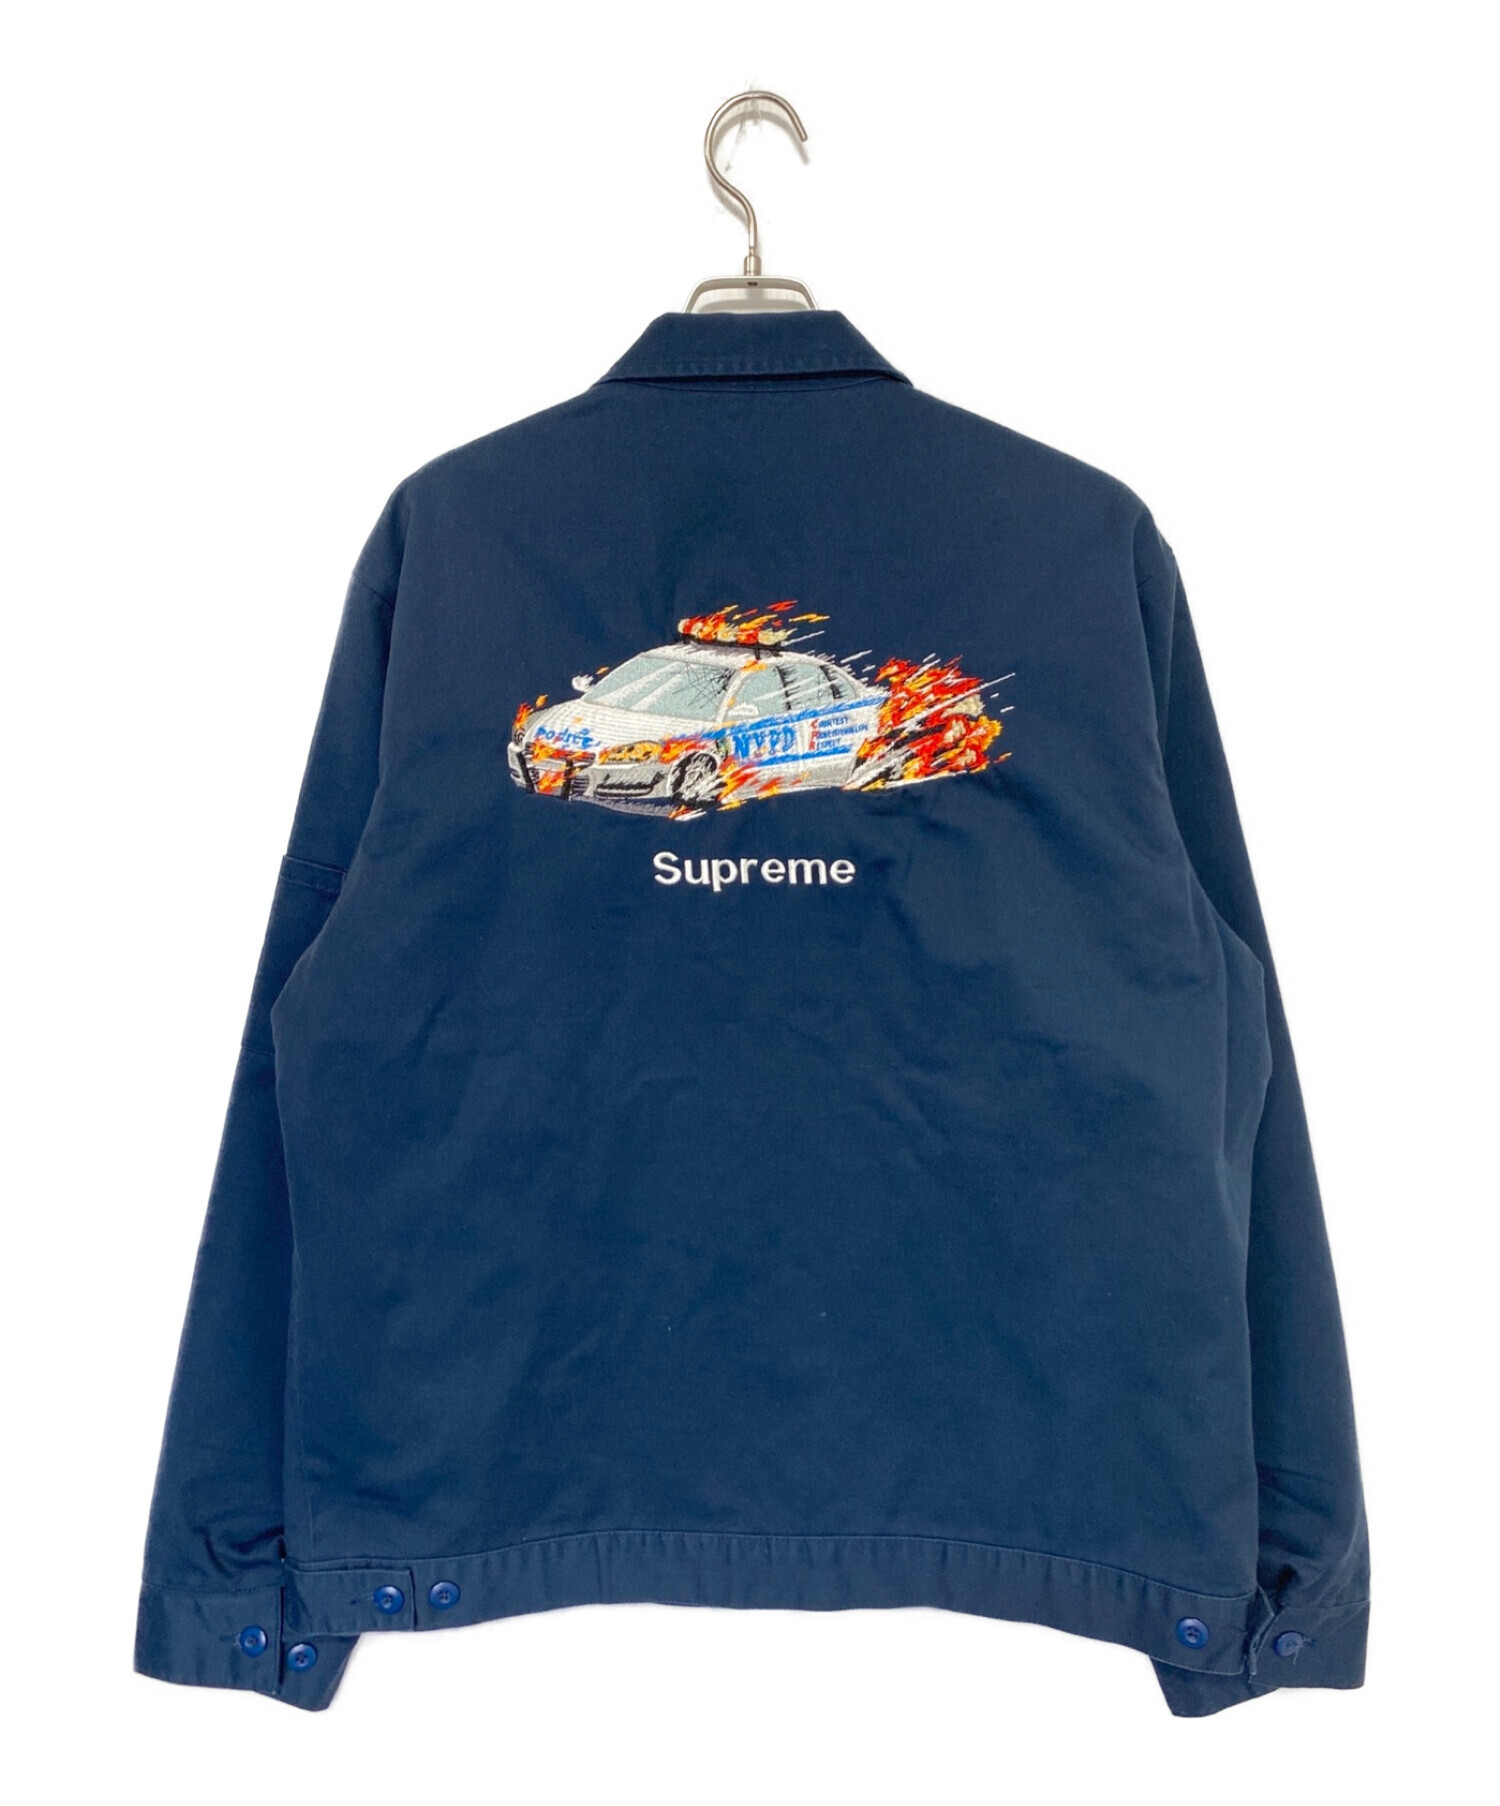 Supreme Cop Car Embroidered Work Jacketヴァージルアブロー